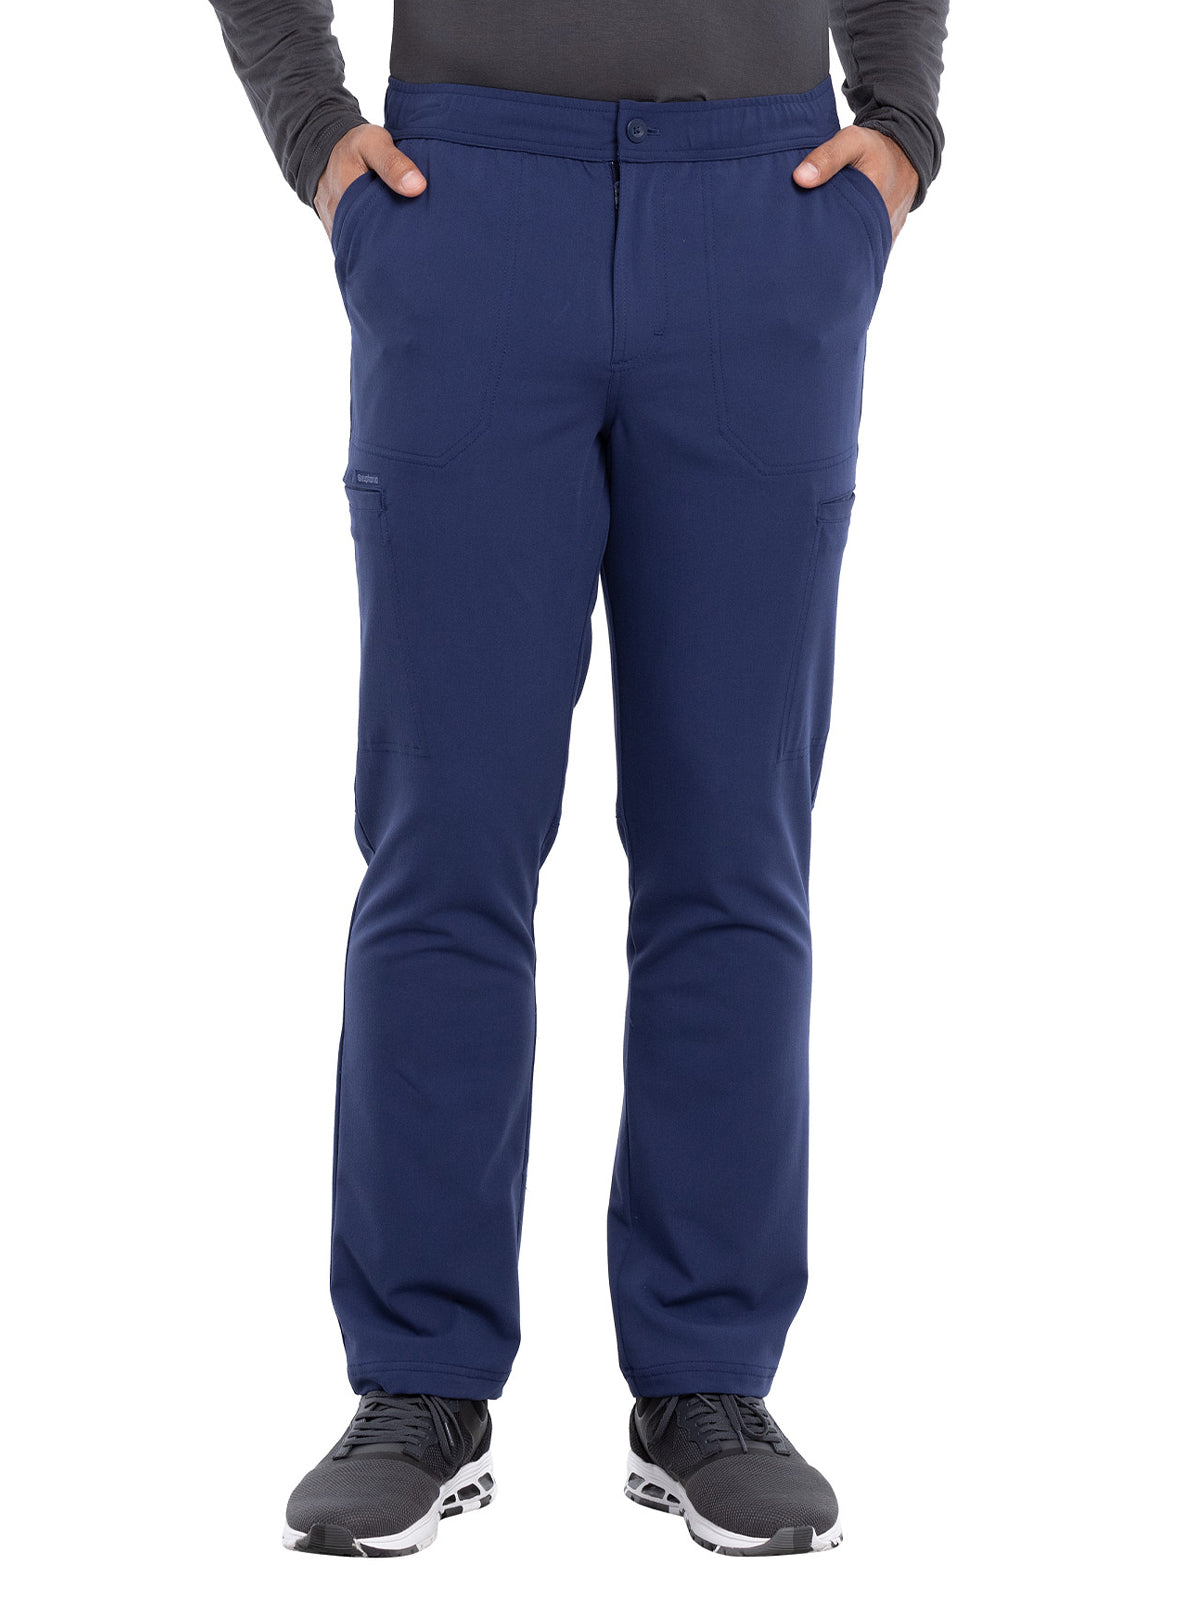 Men's Mid Rise Button Closure Fly Front Cargo Pant